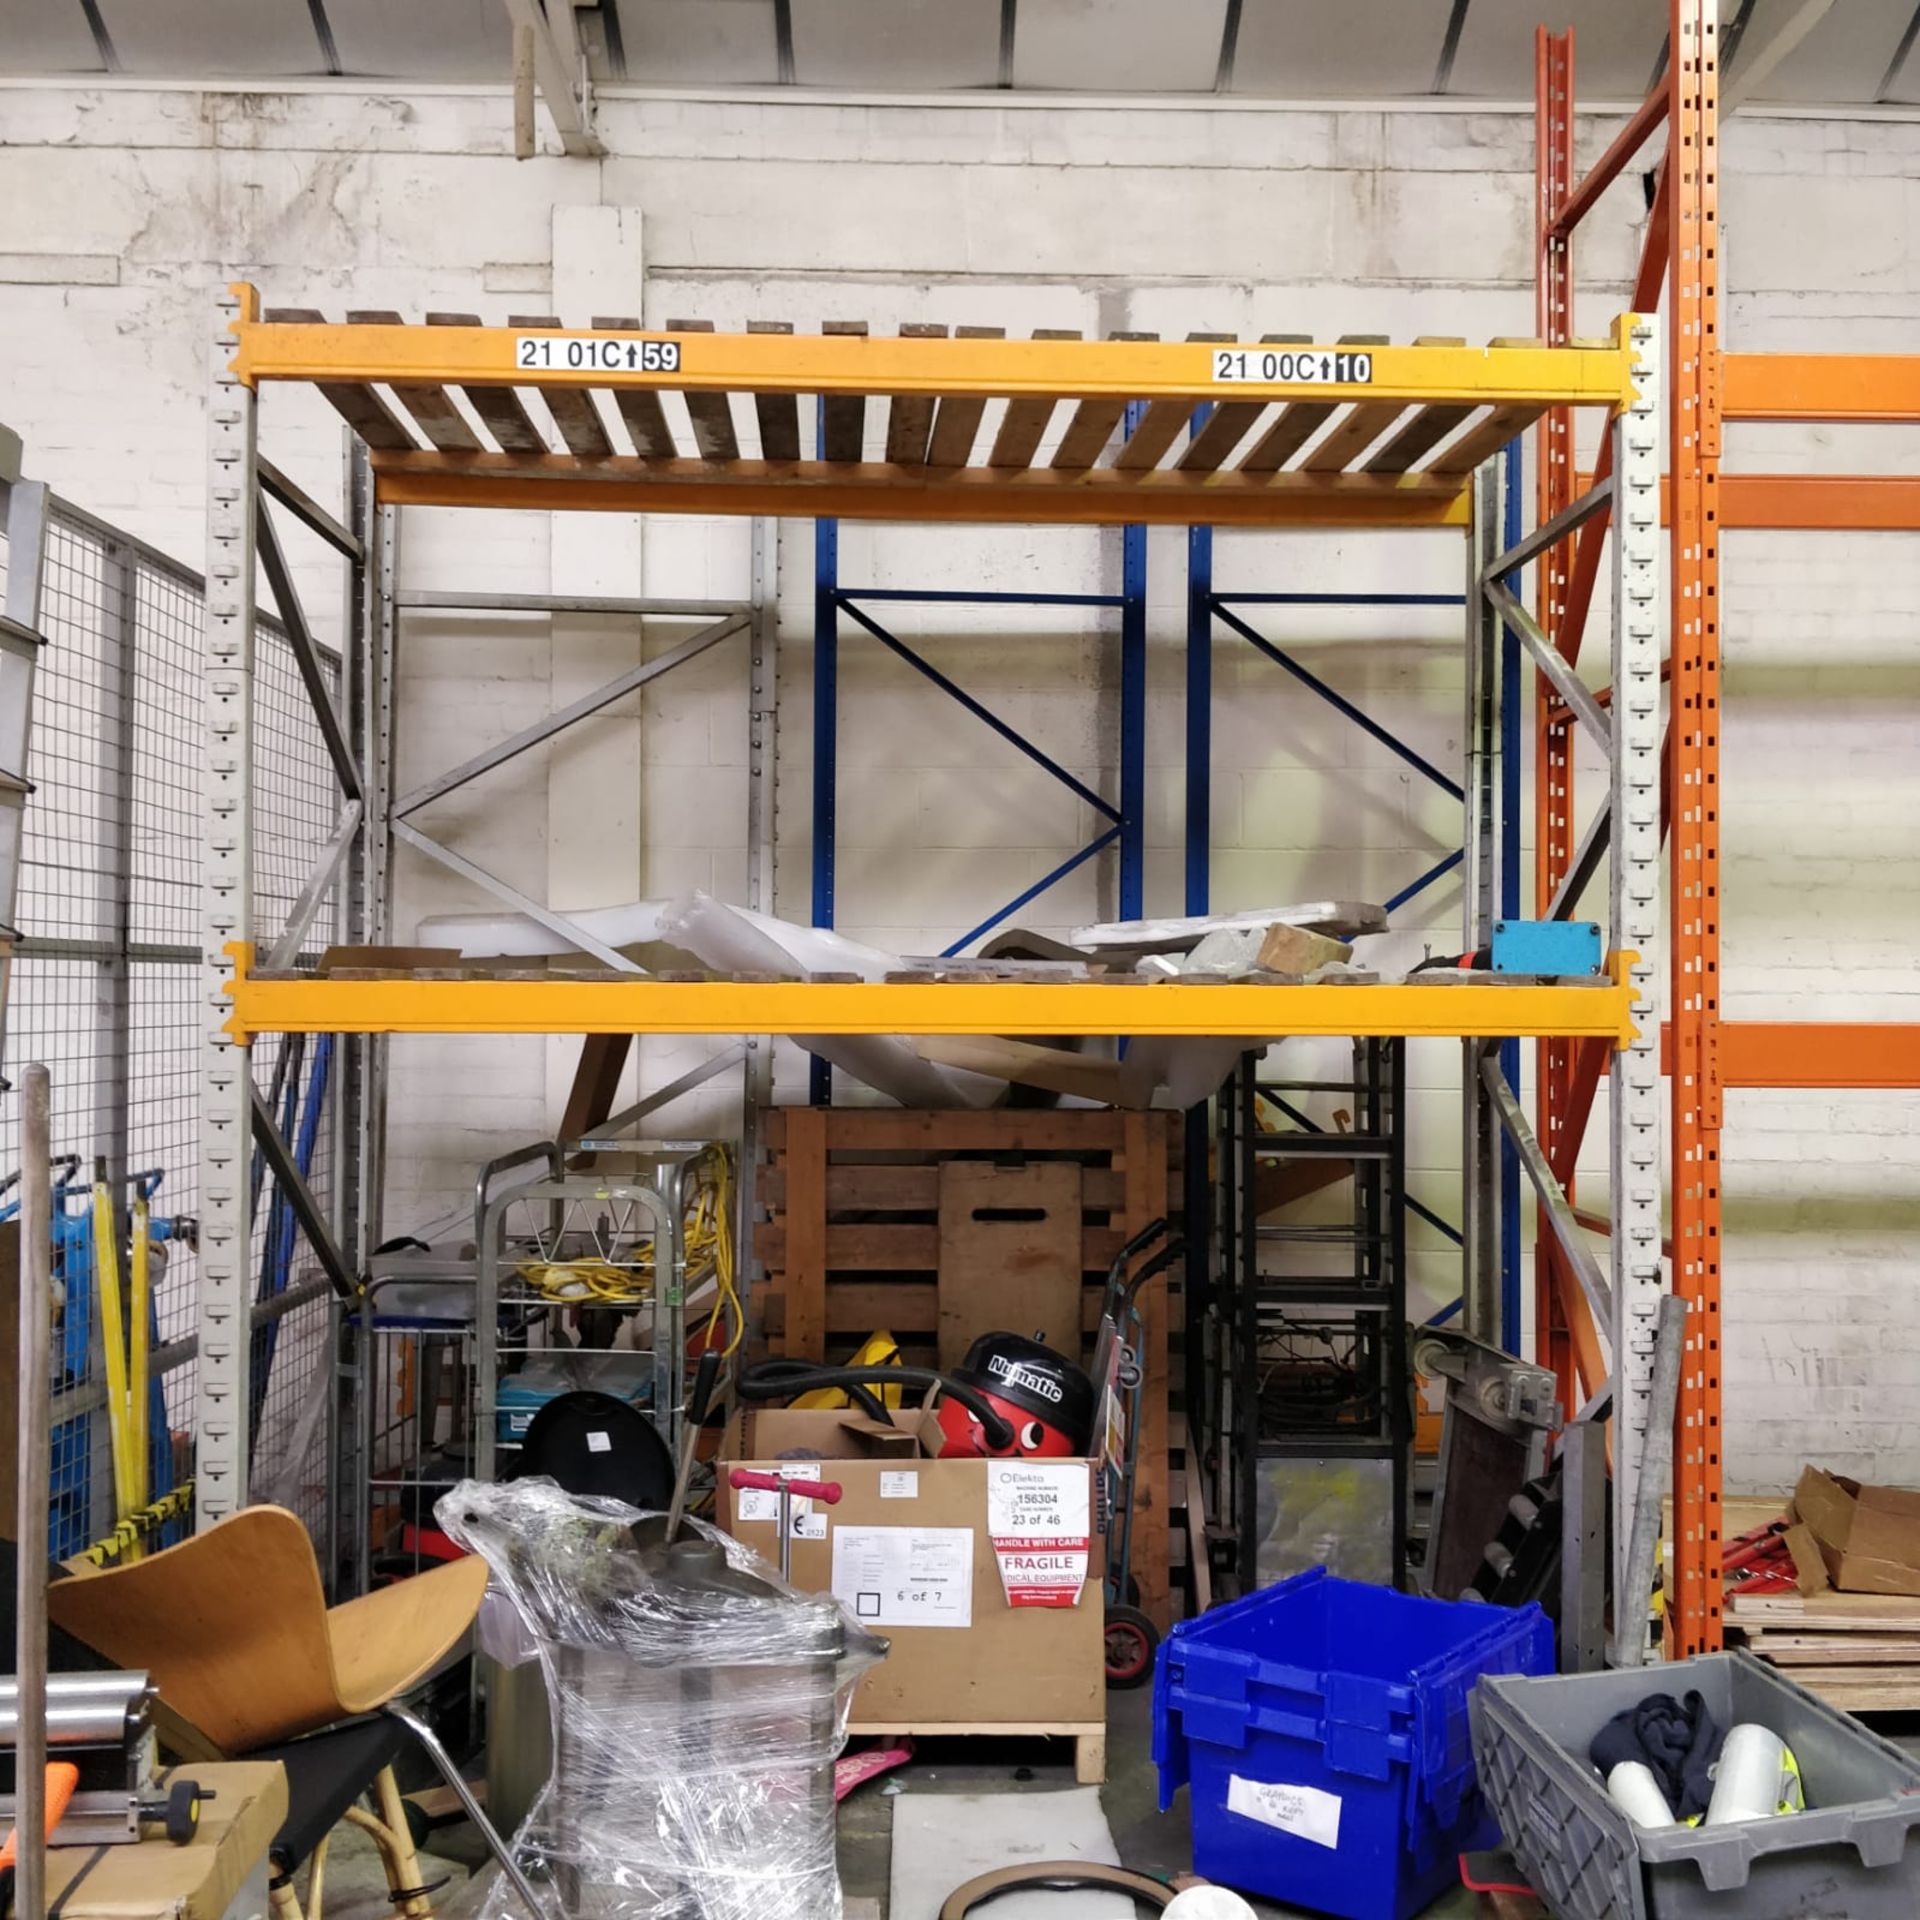 7 x Bays of Assort Pallet Racking - Includes 10 Uprights and 15 Crossbeams - Ref: MPC - CL011 - - Image 3 of 7